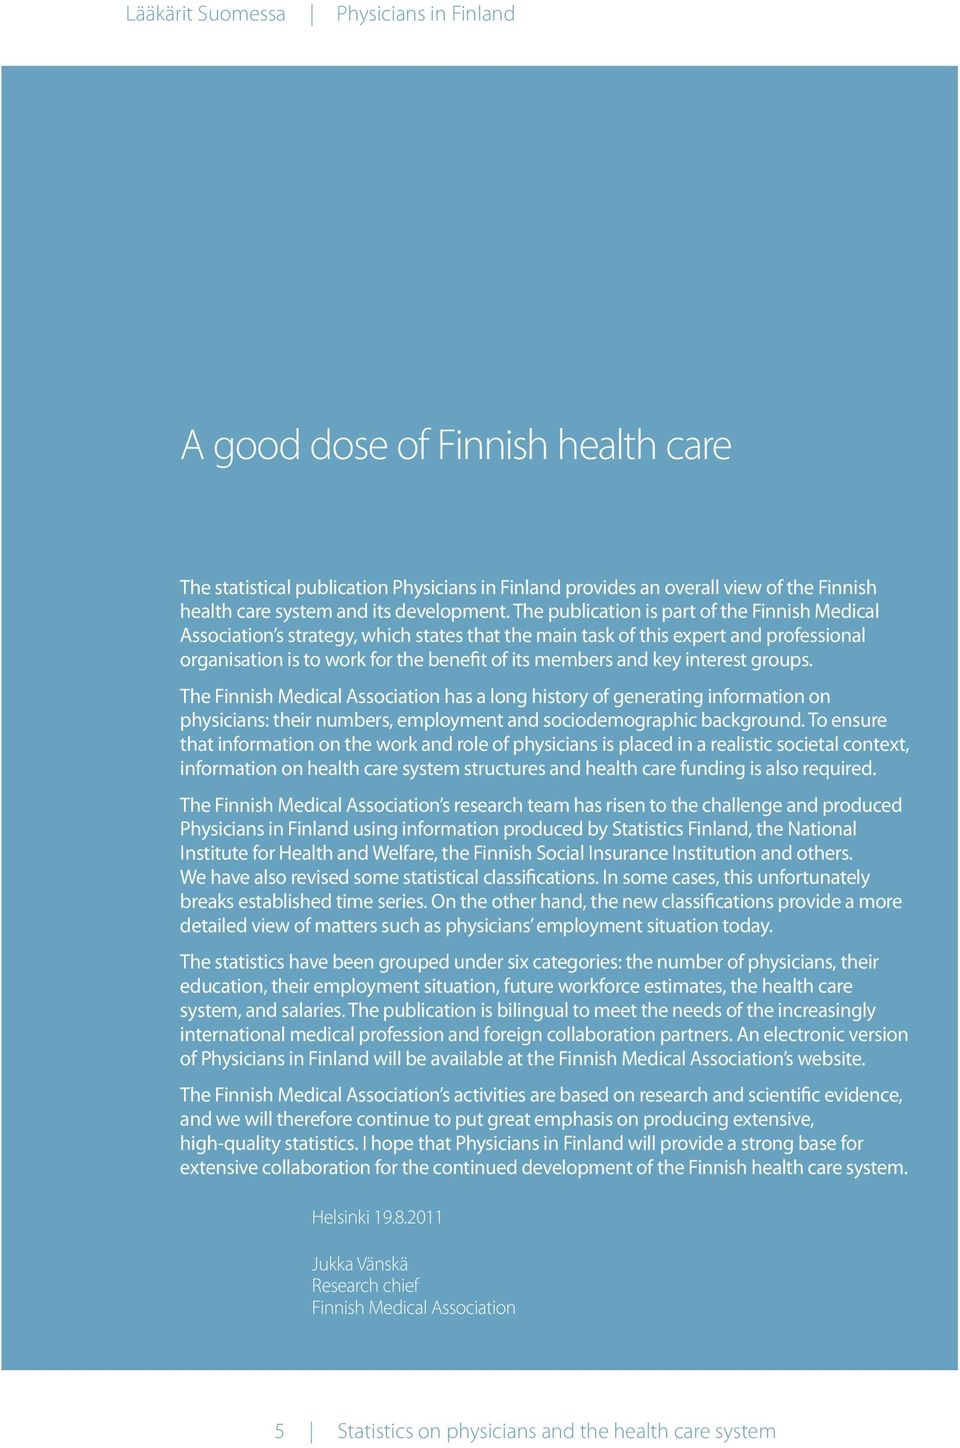 The publication is part of the Finnish Medical Association s strategy, which states that the main task of this expert and professional organisation is to work for the benefit of its members and key